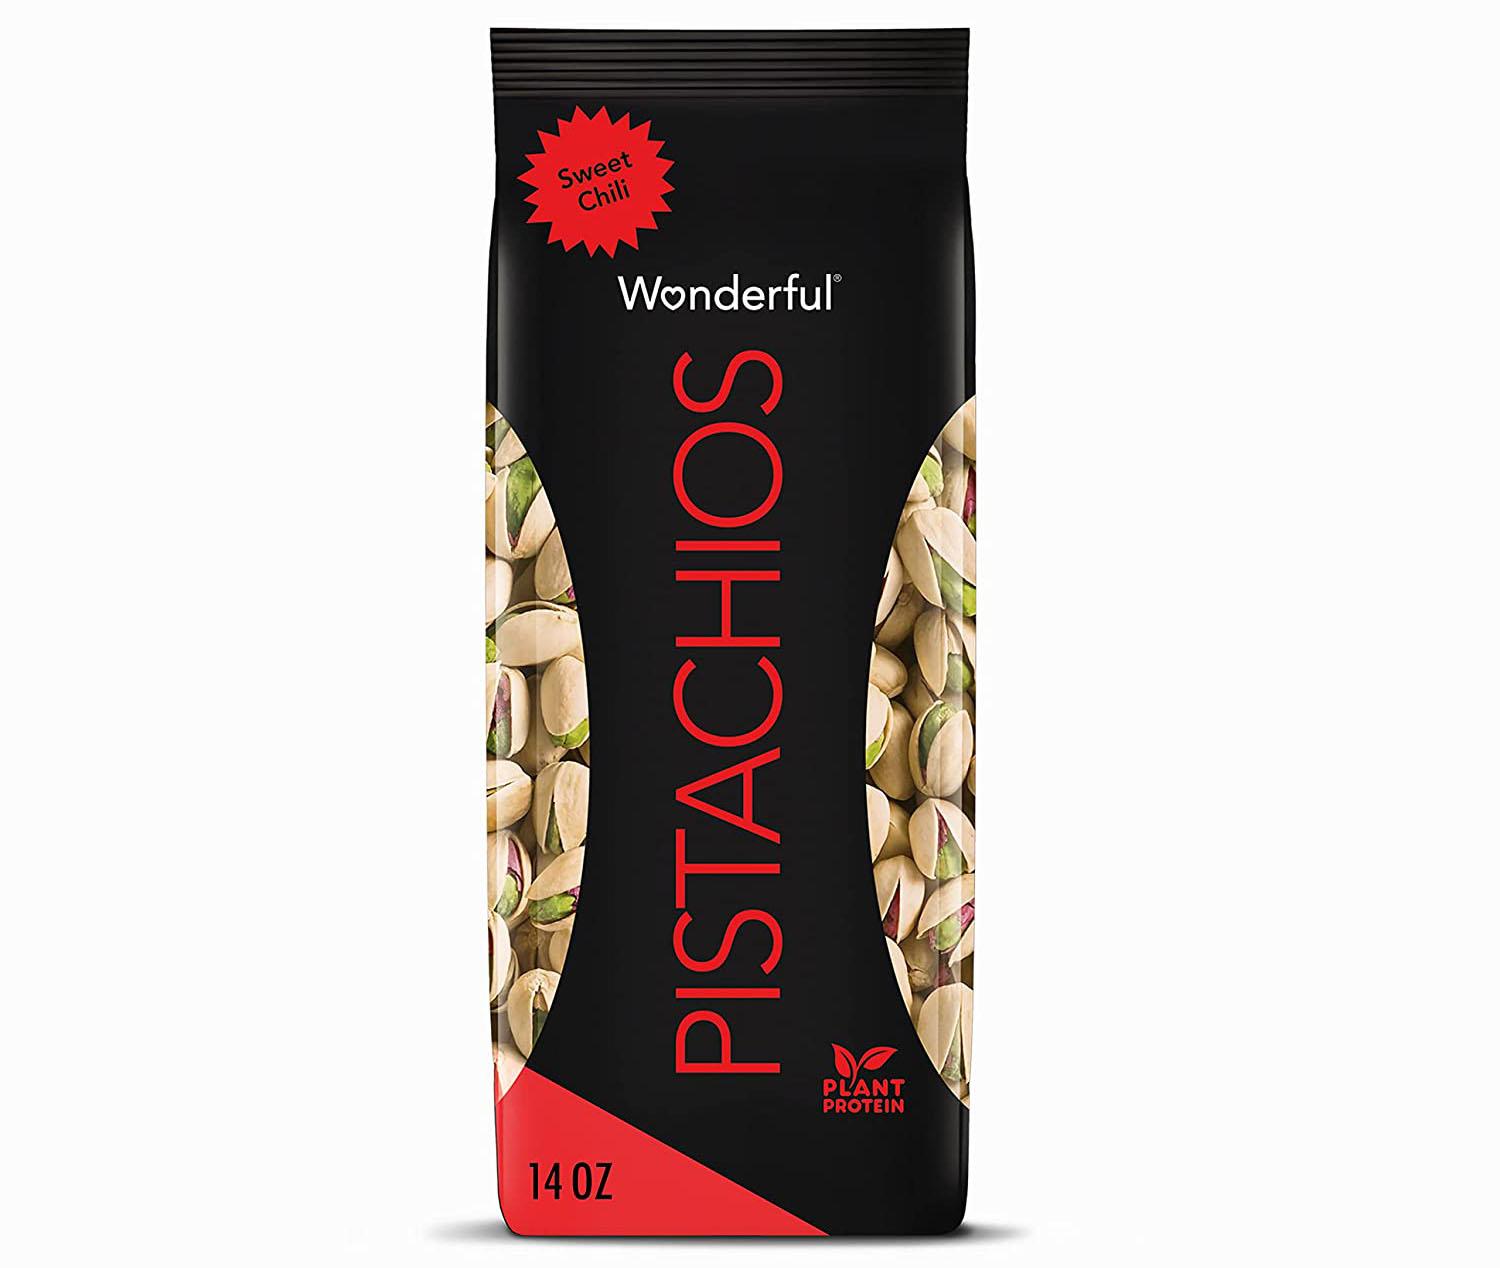 Wonderful Pistachios Sweet Chili Flavor for $3.69 Shipped